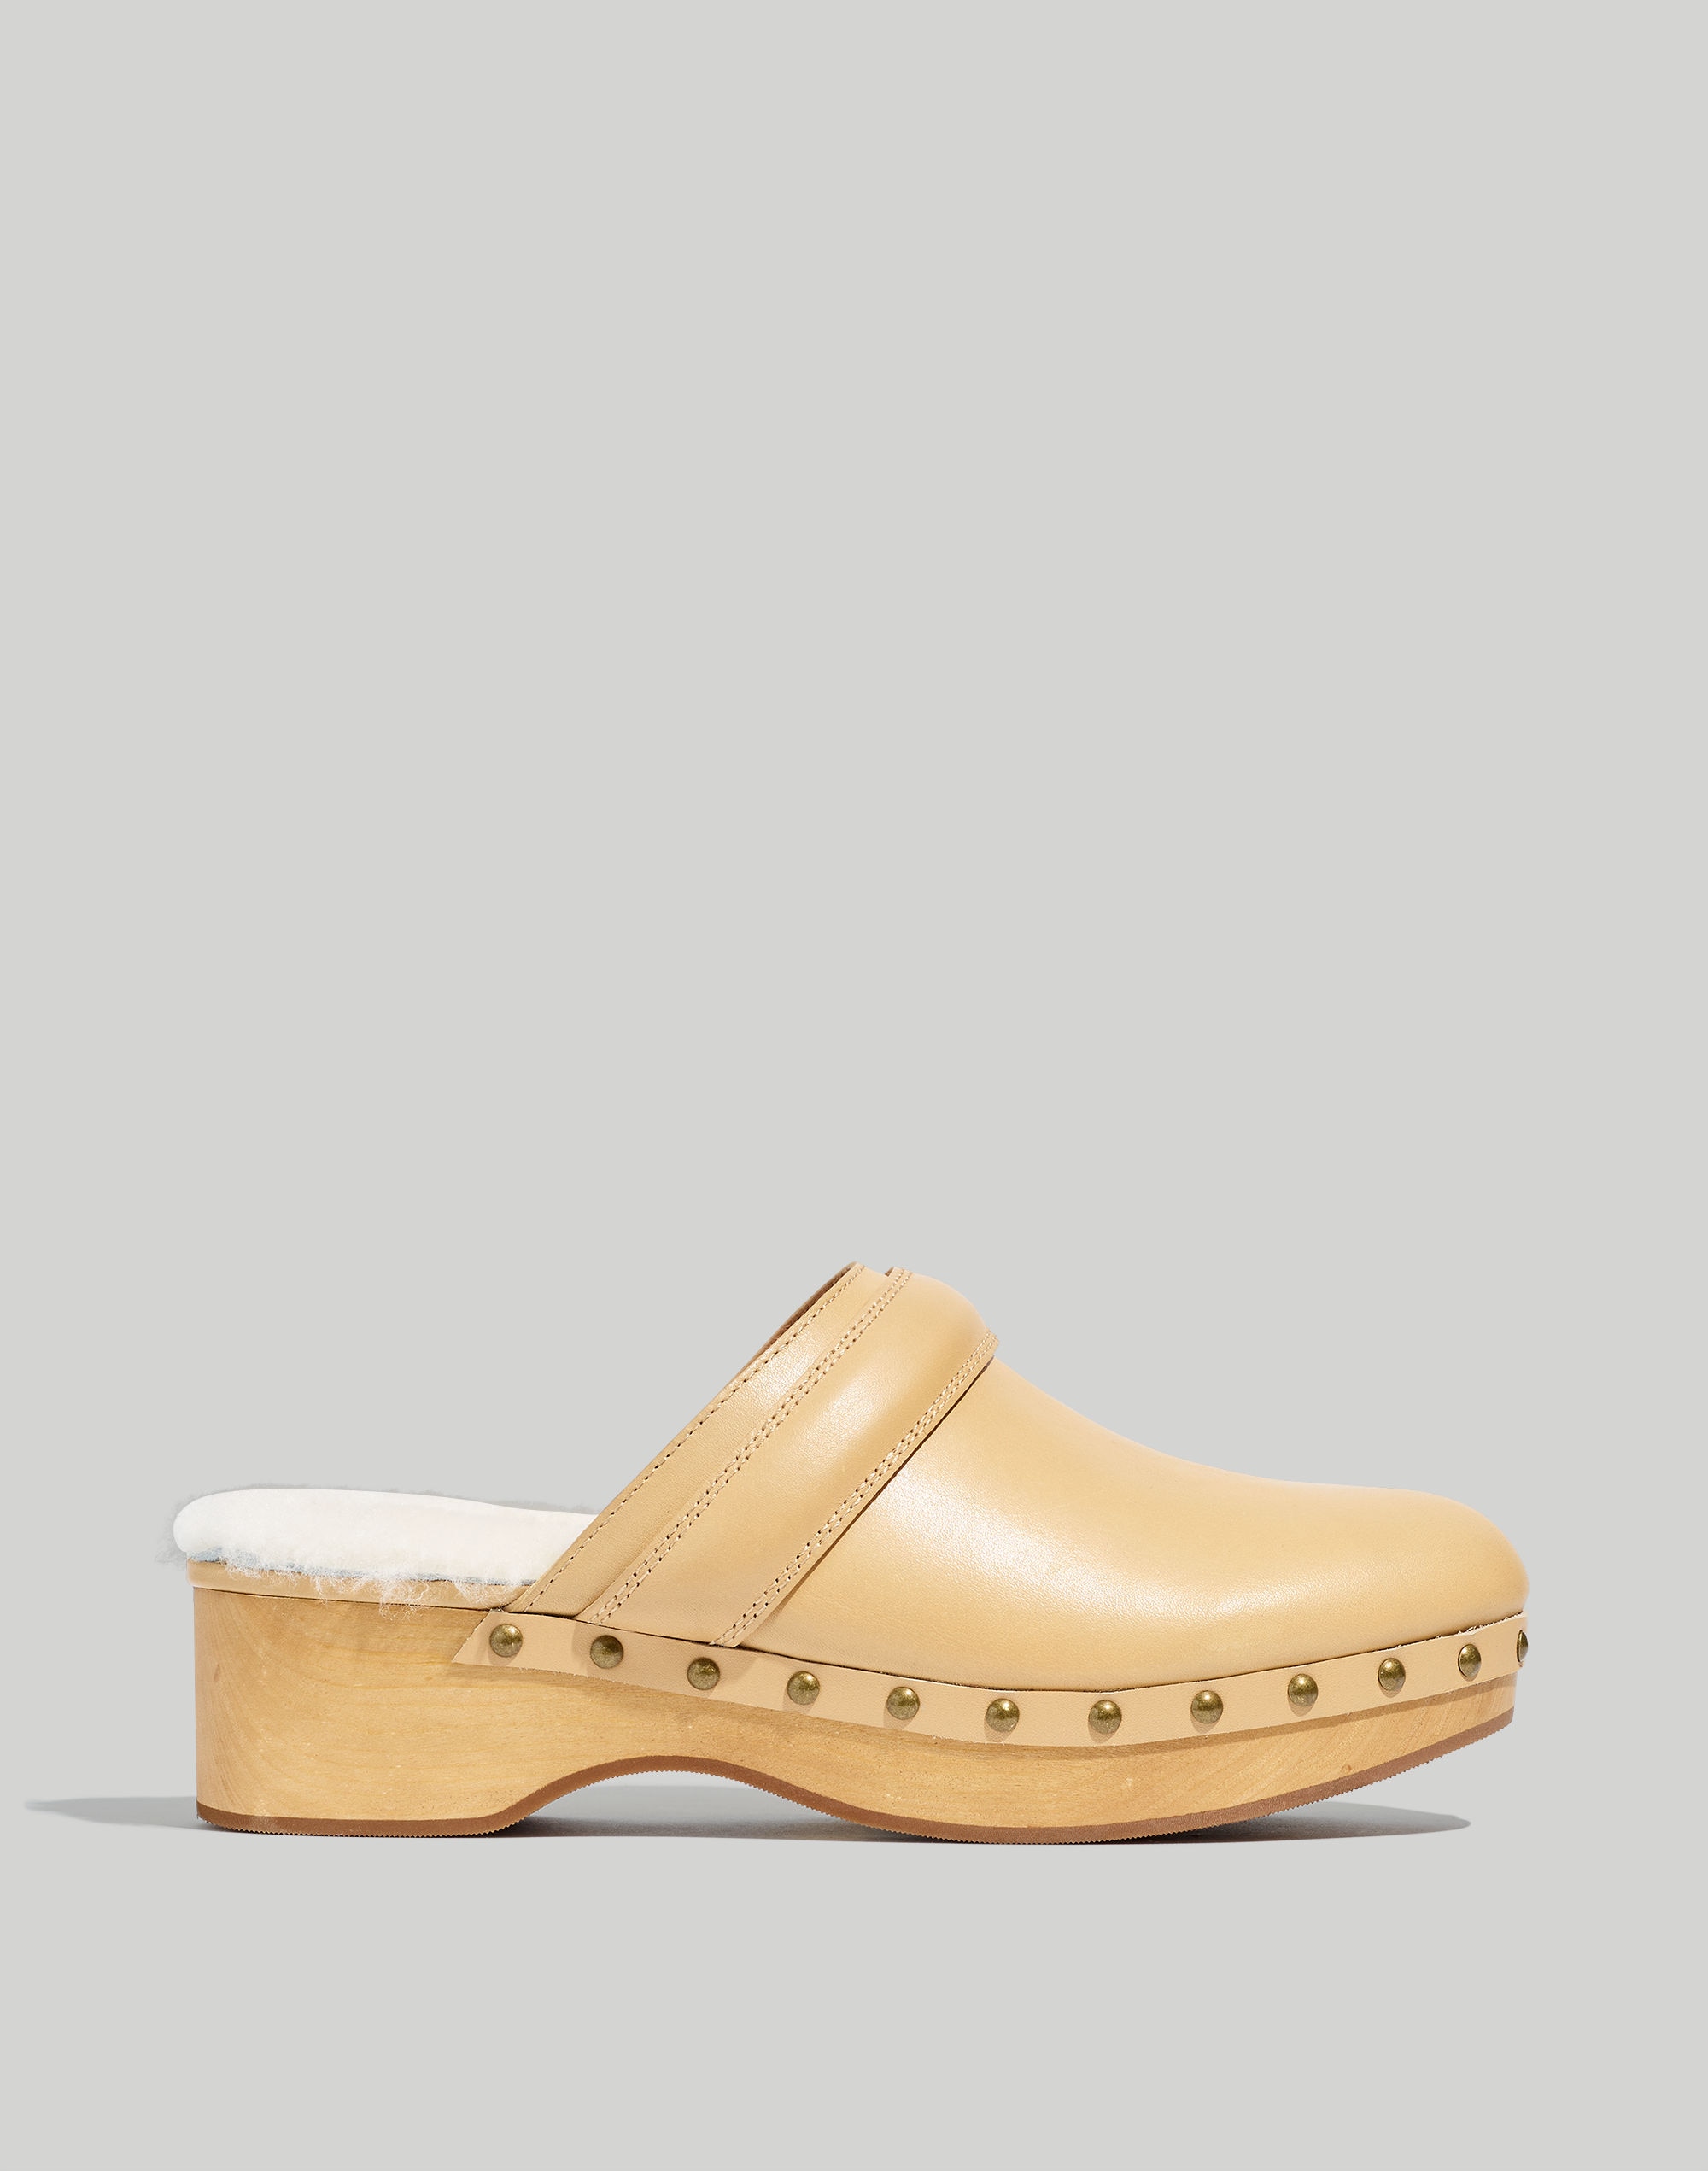 The Cecily Clog in Shearling